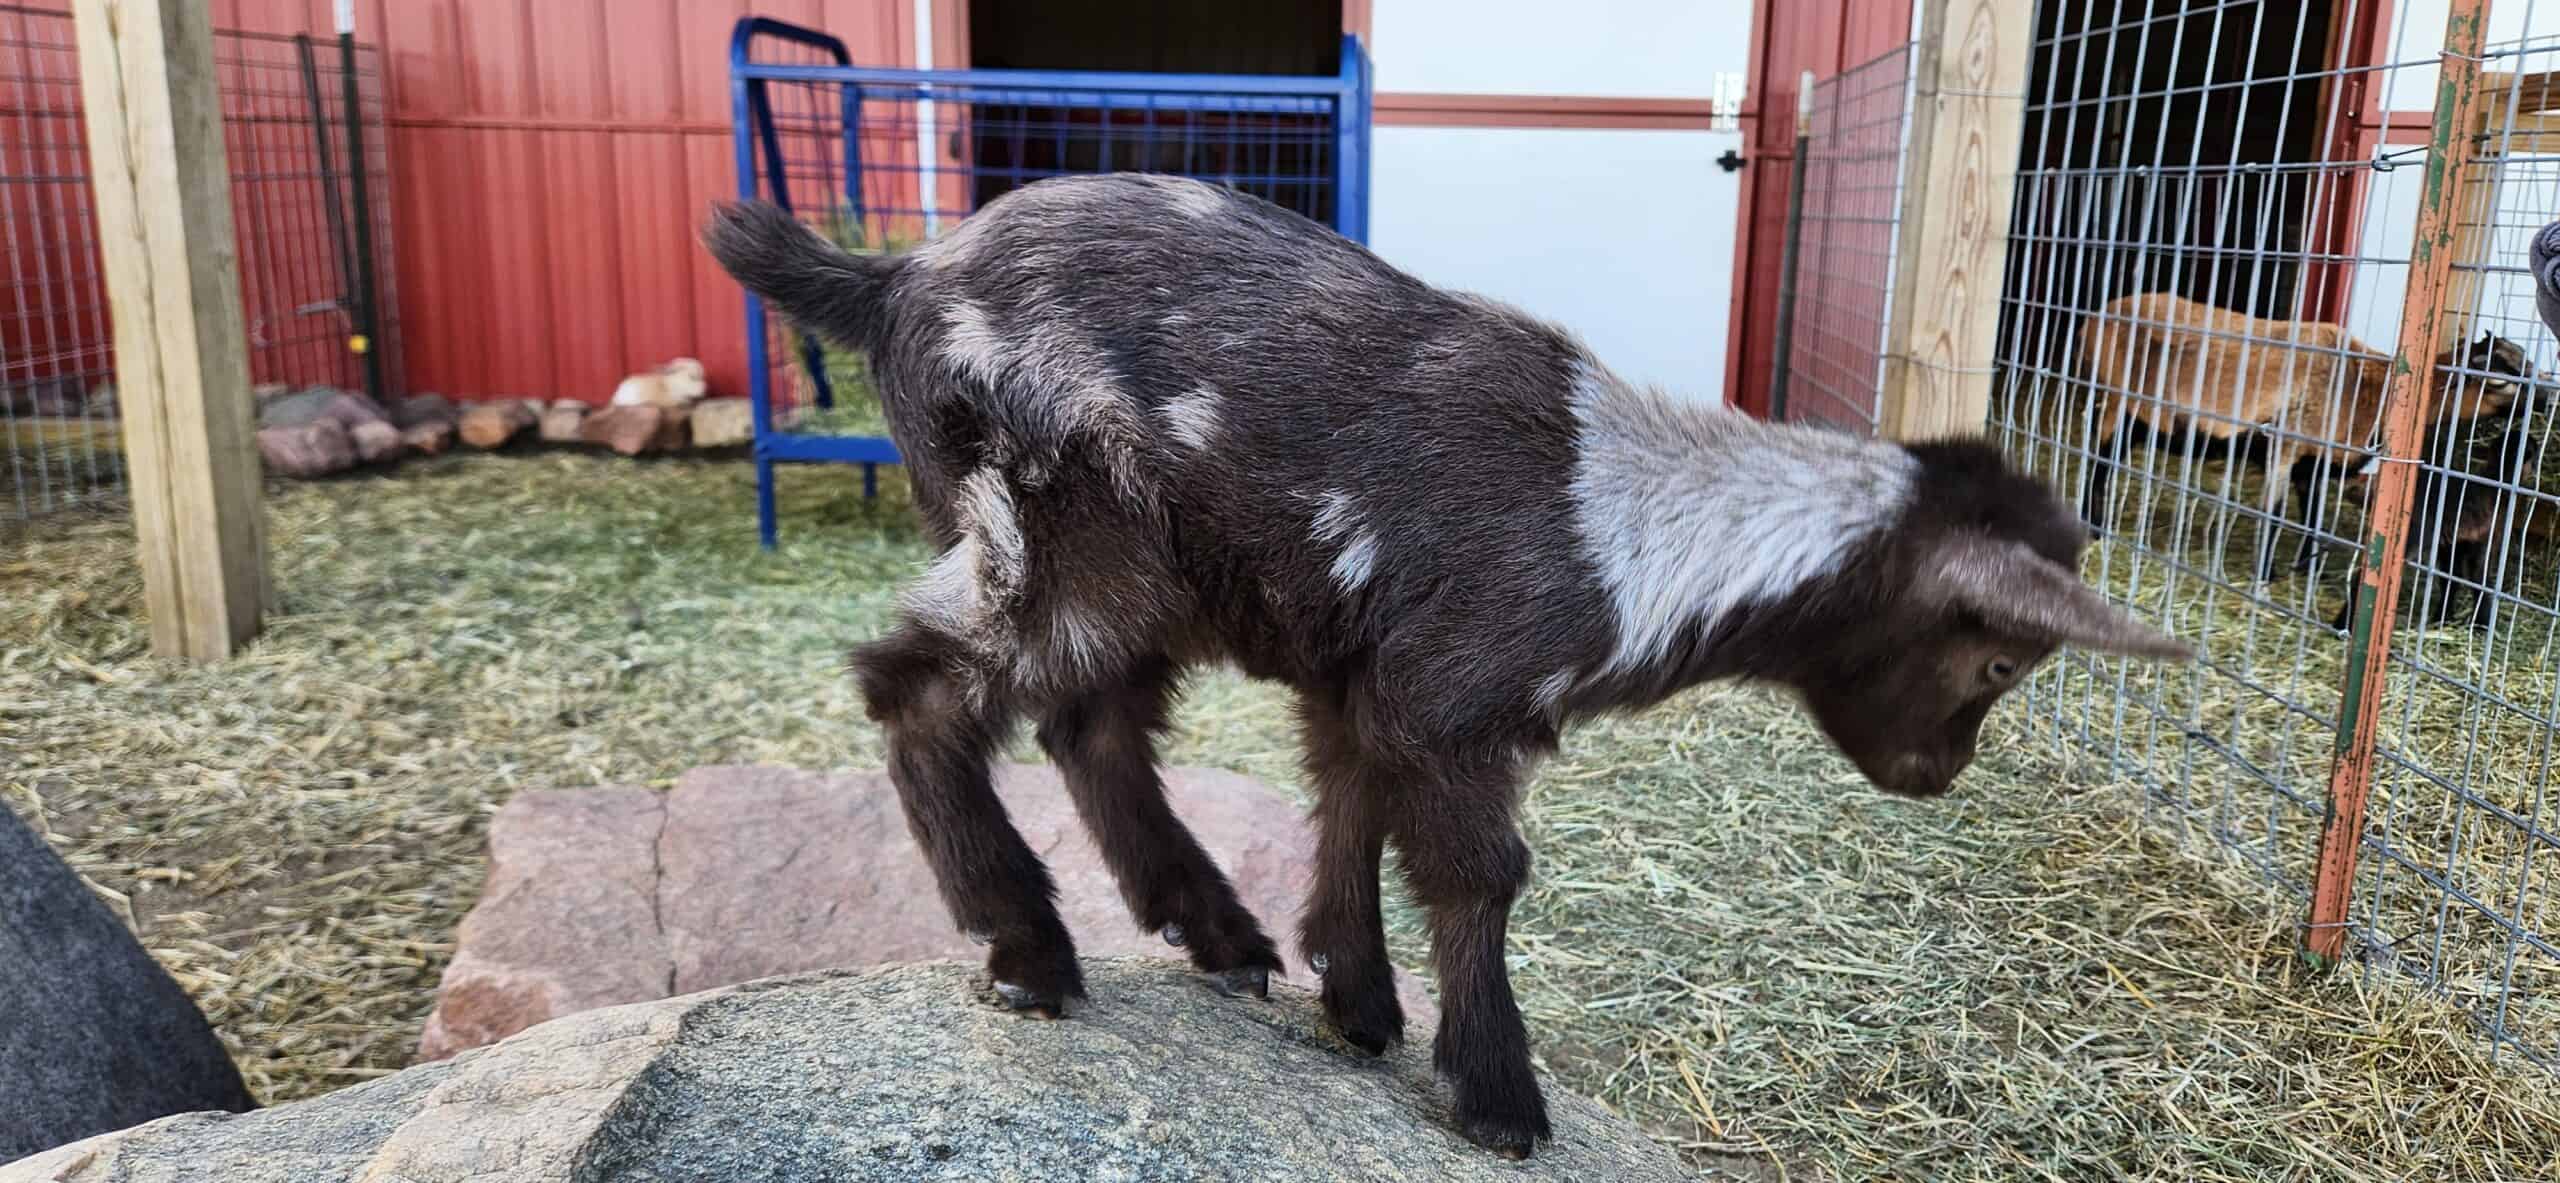 Baby Goat Nigerian Dwarf doe black with roaning and moon spots on a rock